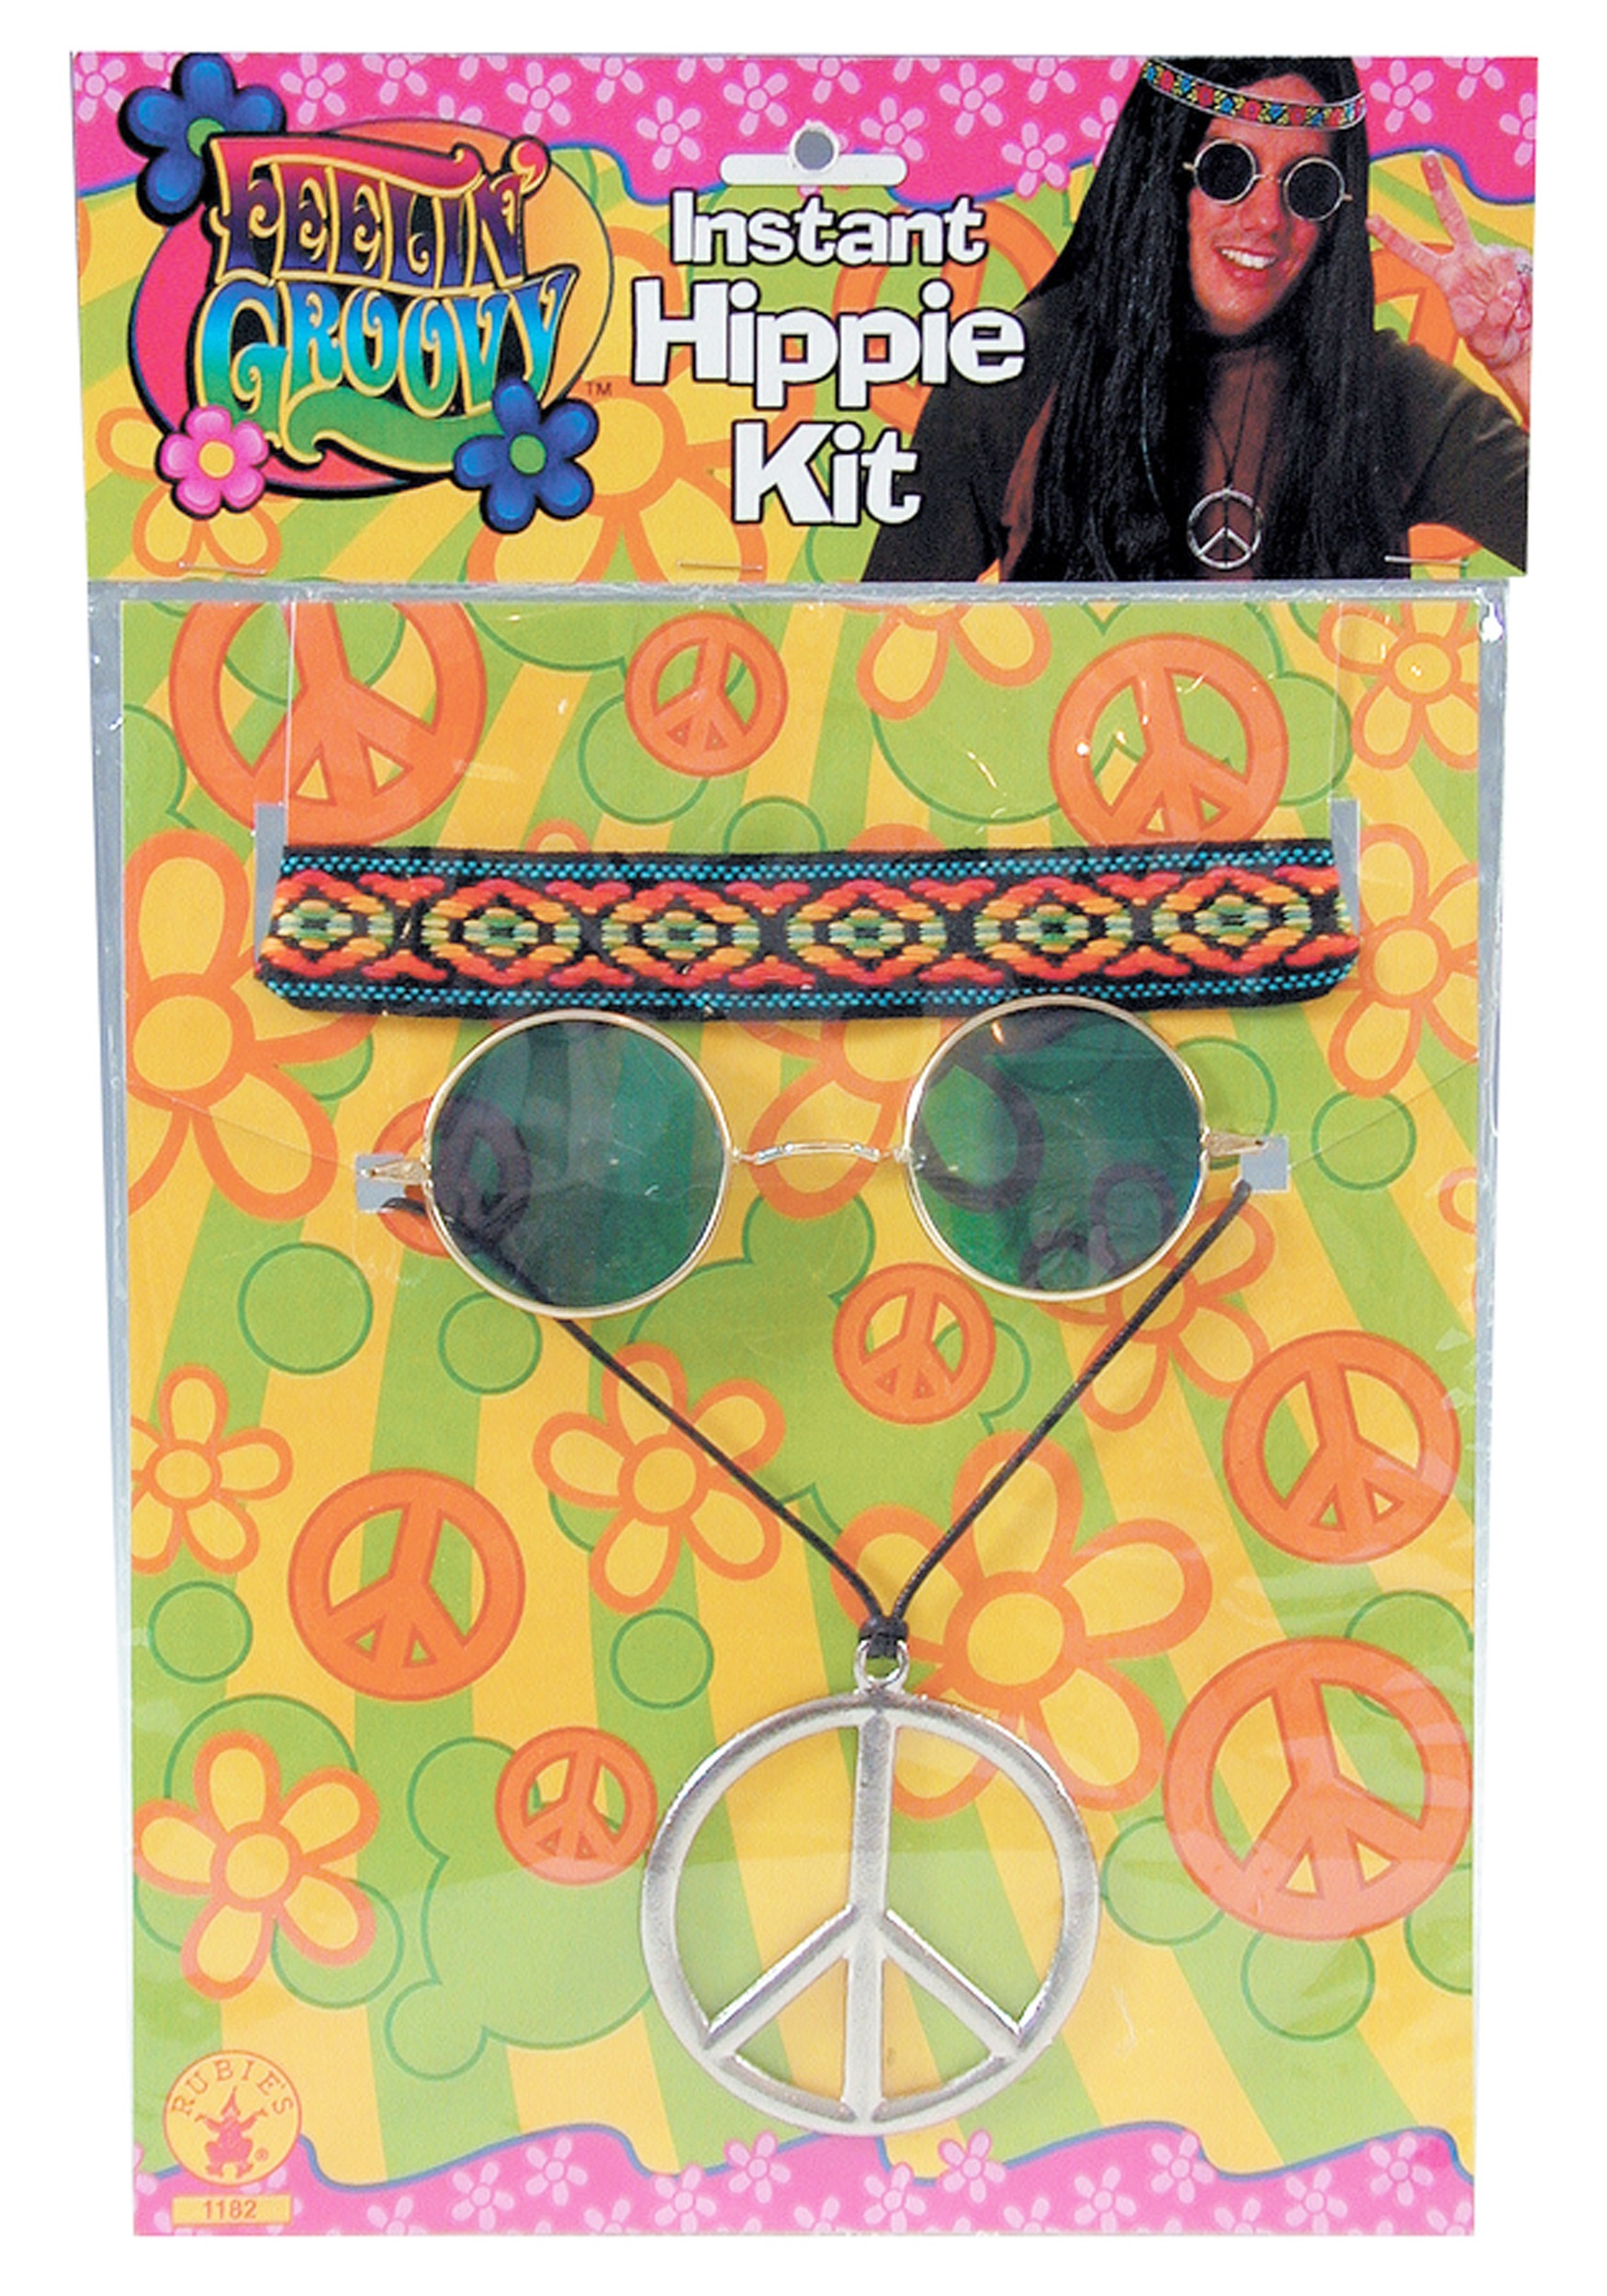 Retro Hippie Adult Accessory Kit , Costume Accessories And DIY Kits